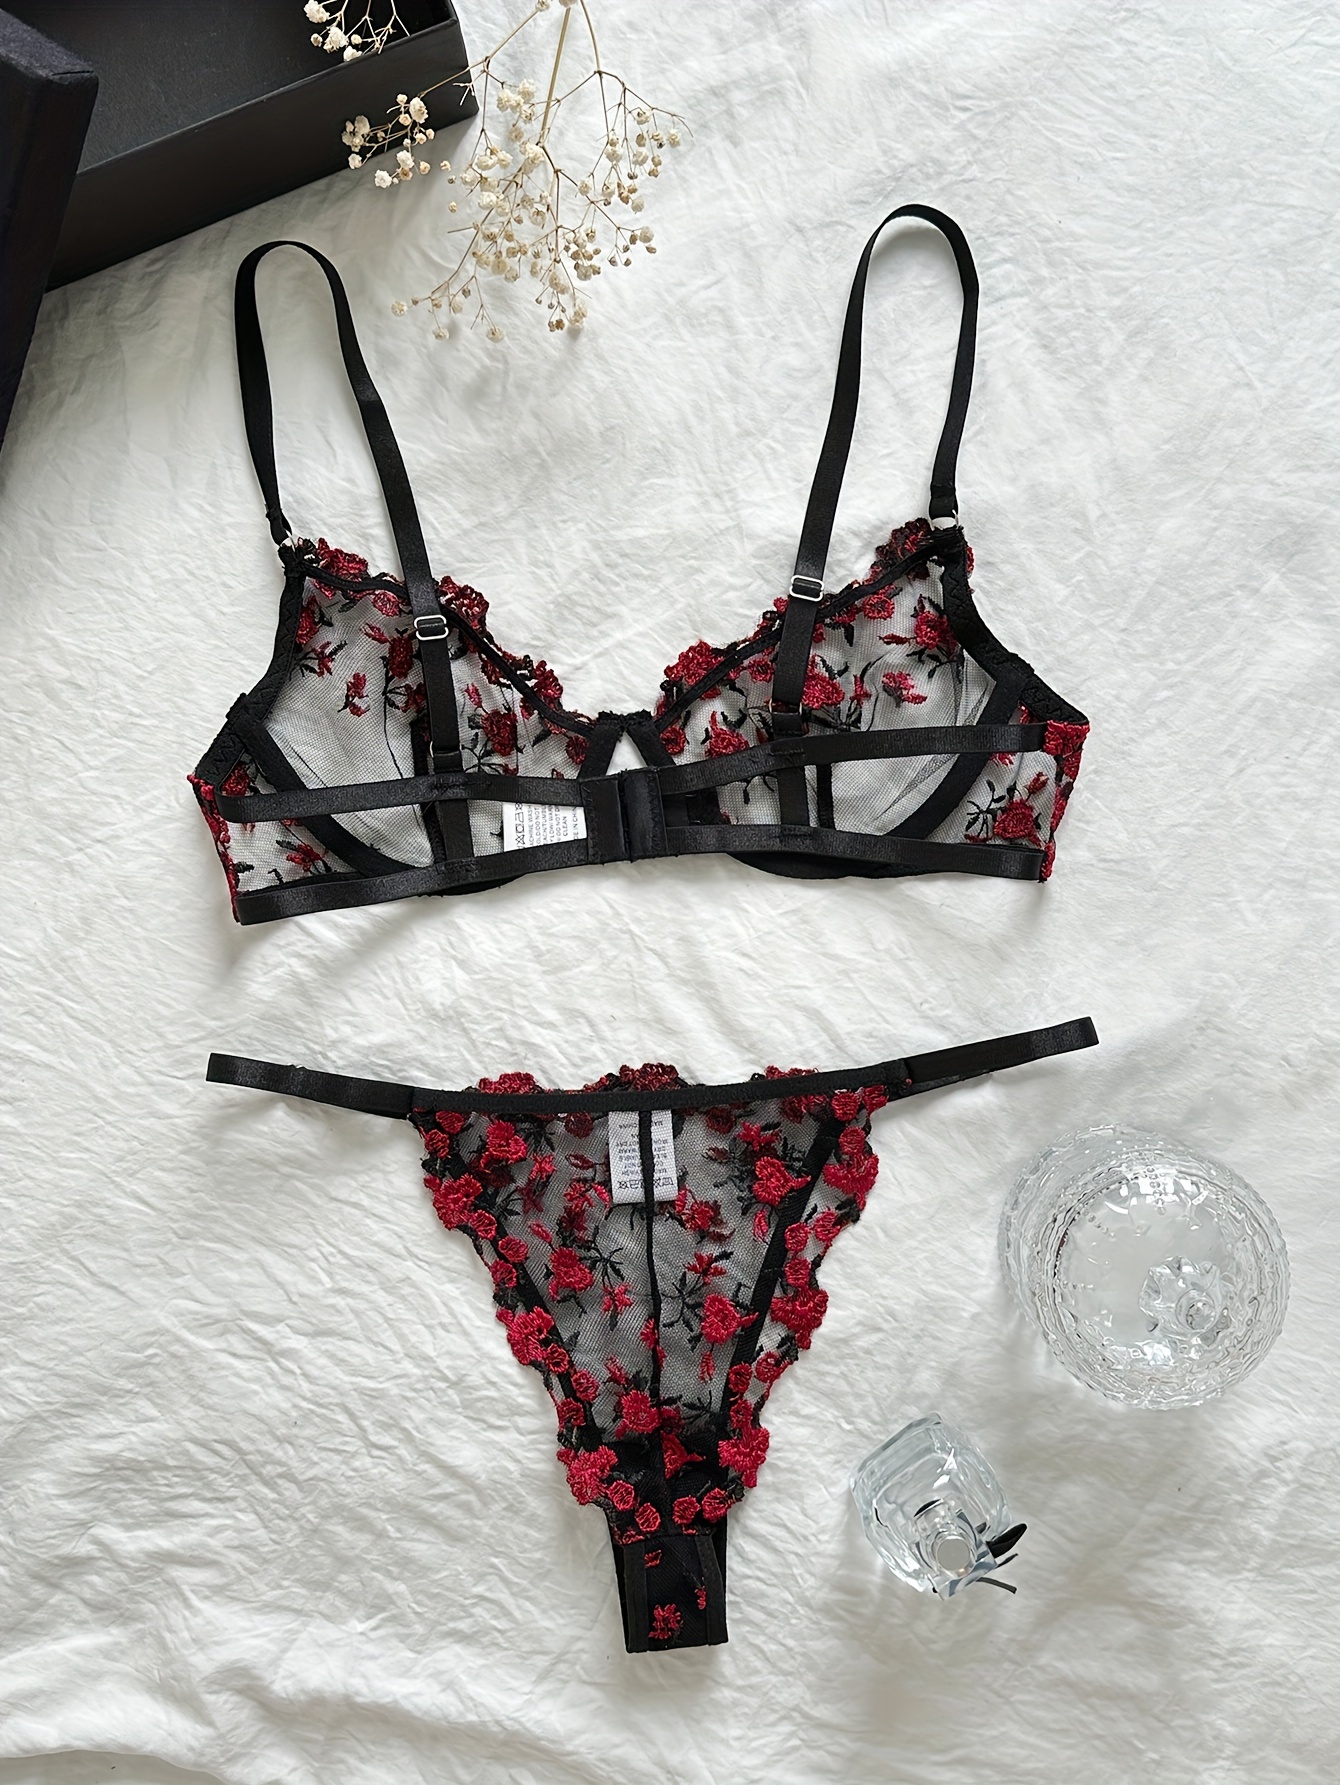  Bolayu Floral Embroidered Mesh Lingerie Set Women's